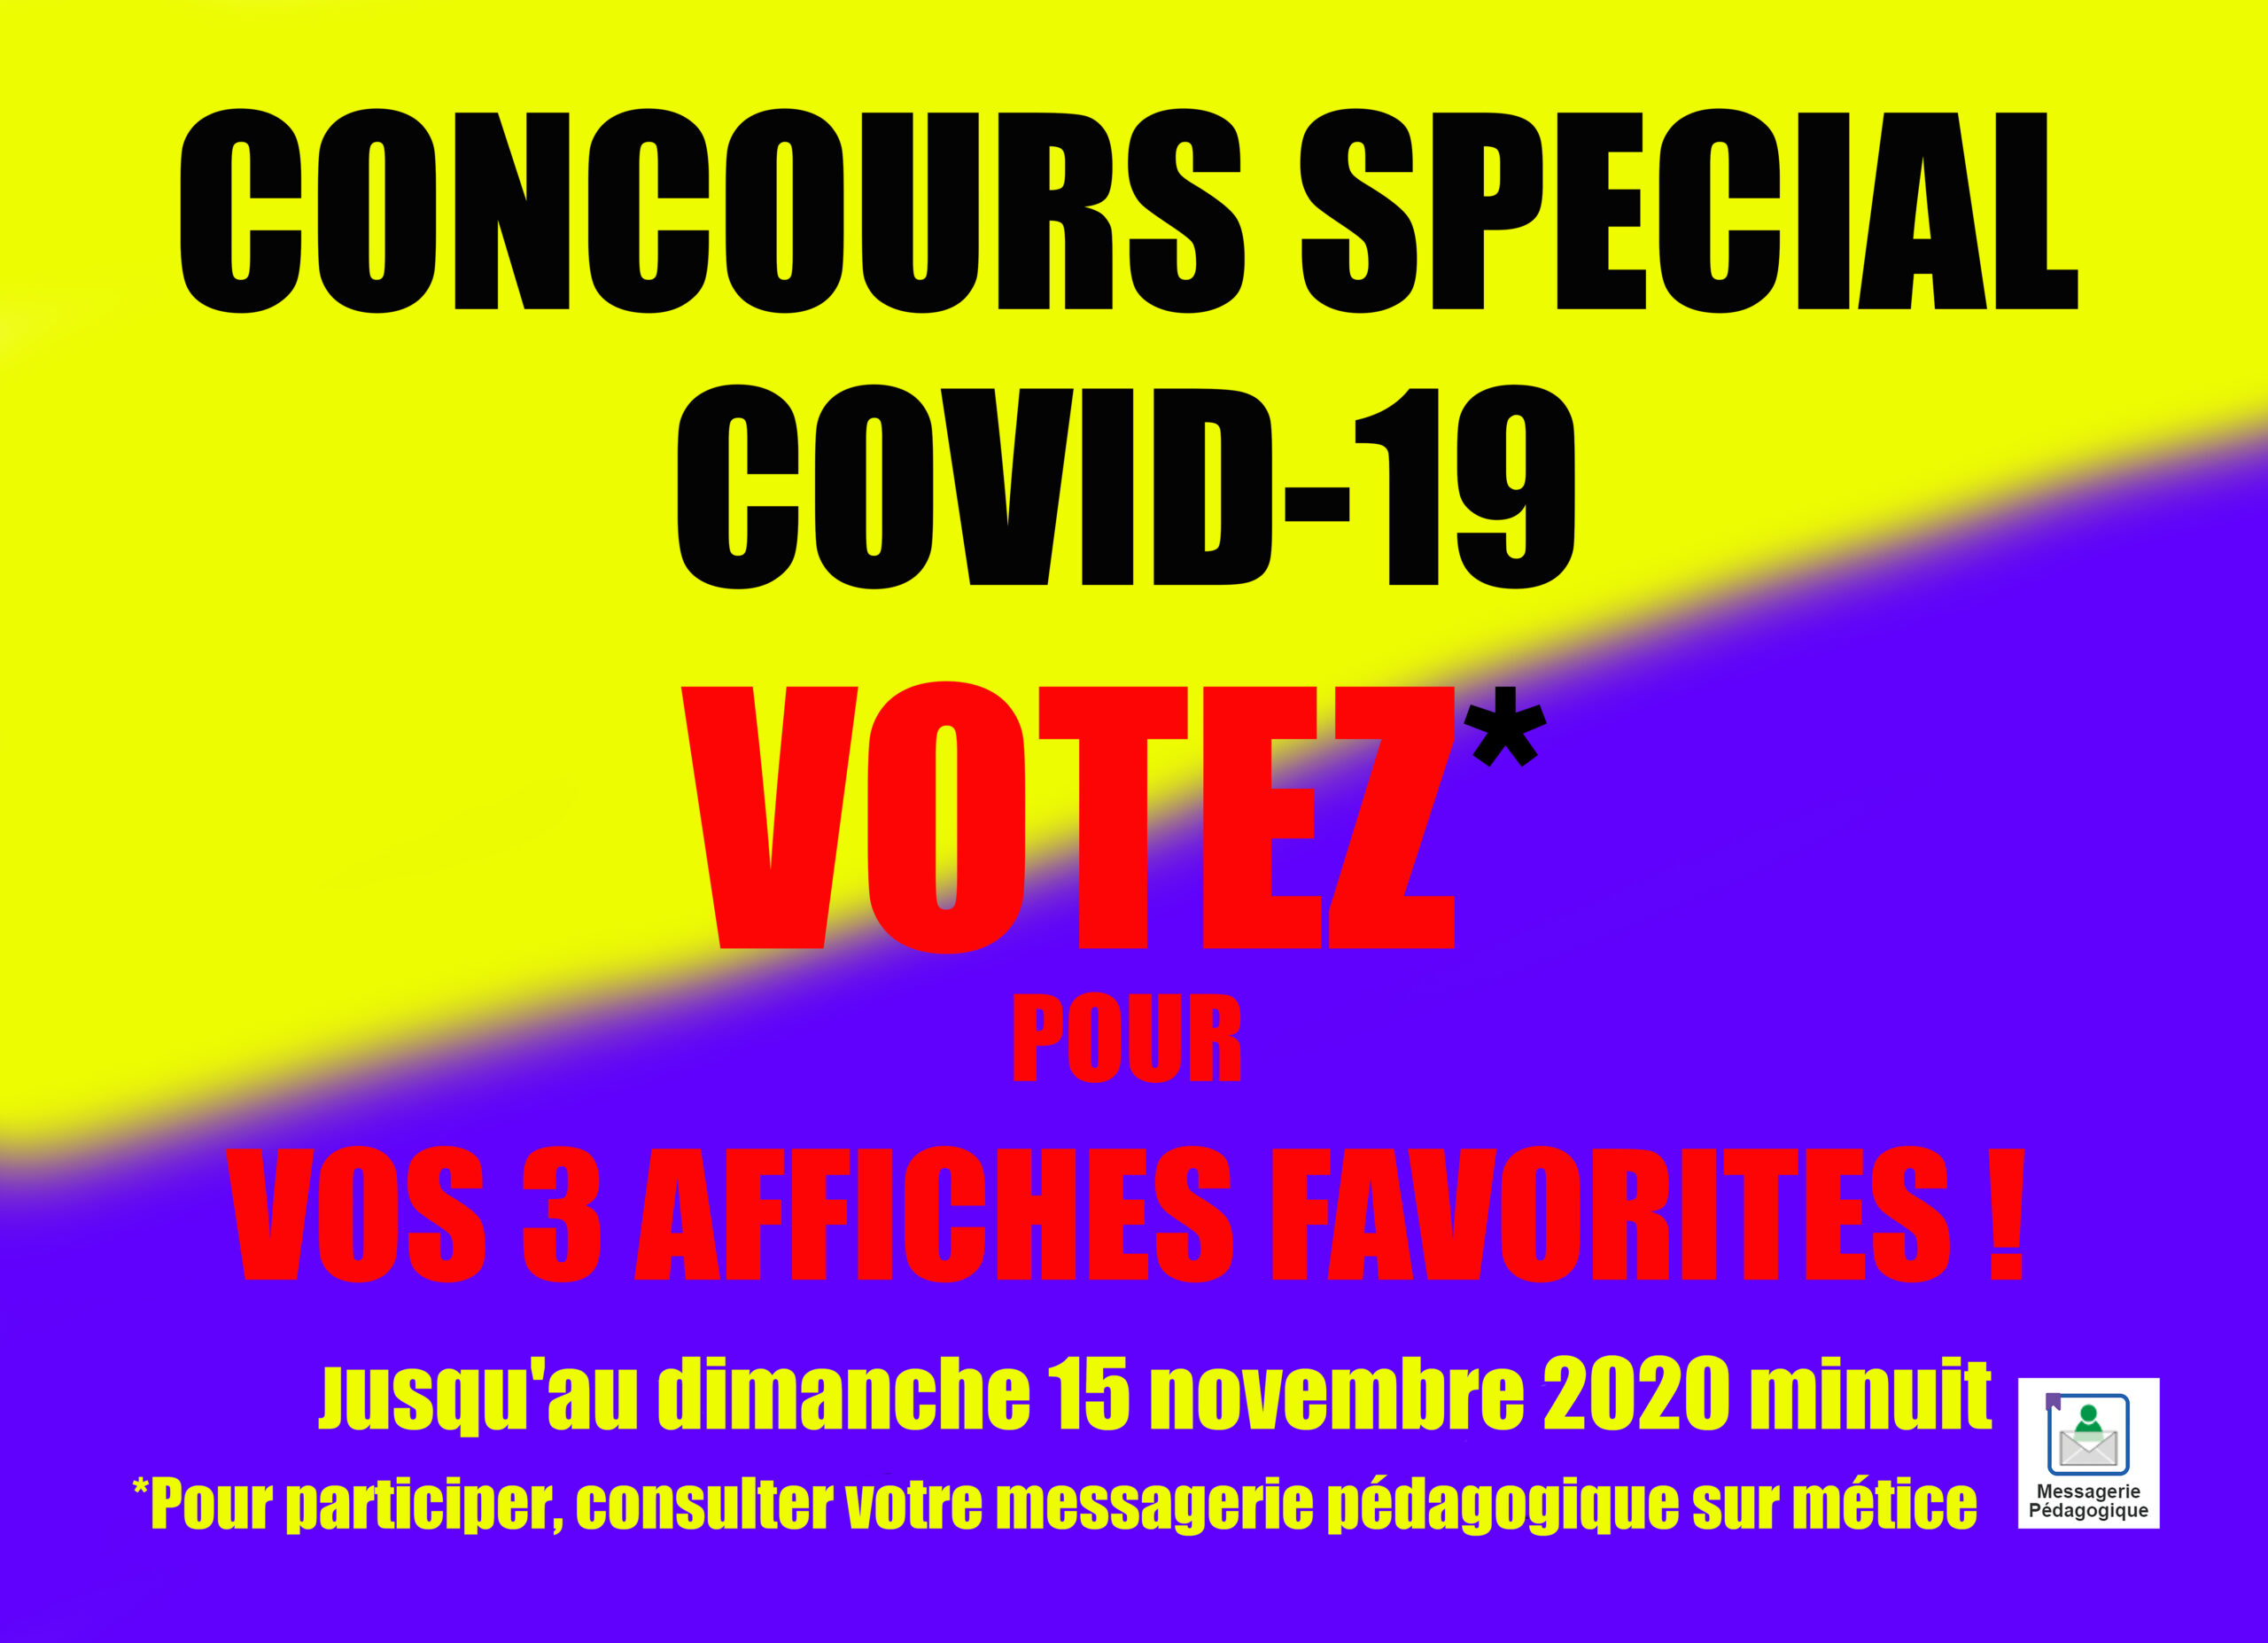 Concours affiches Covid-19